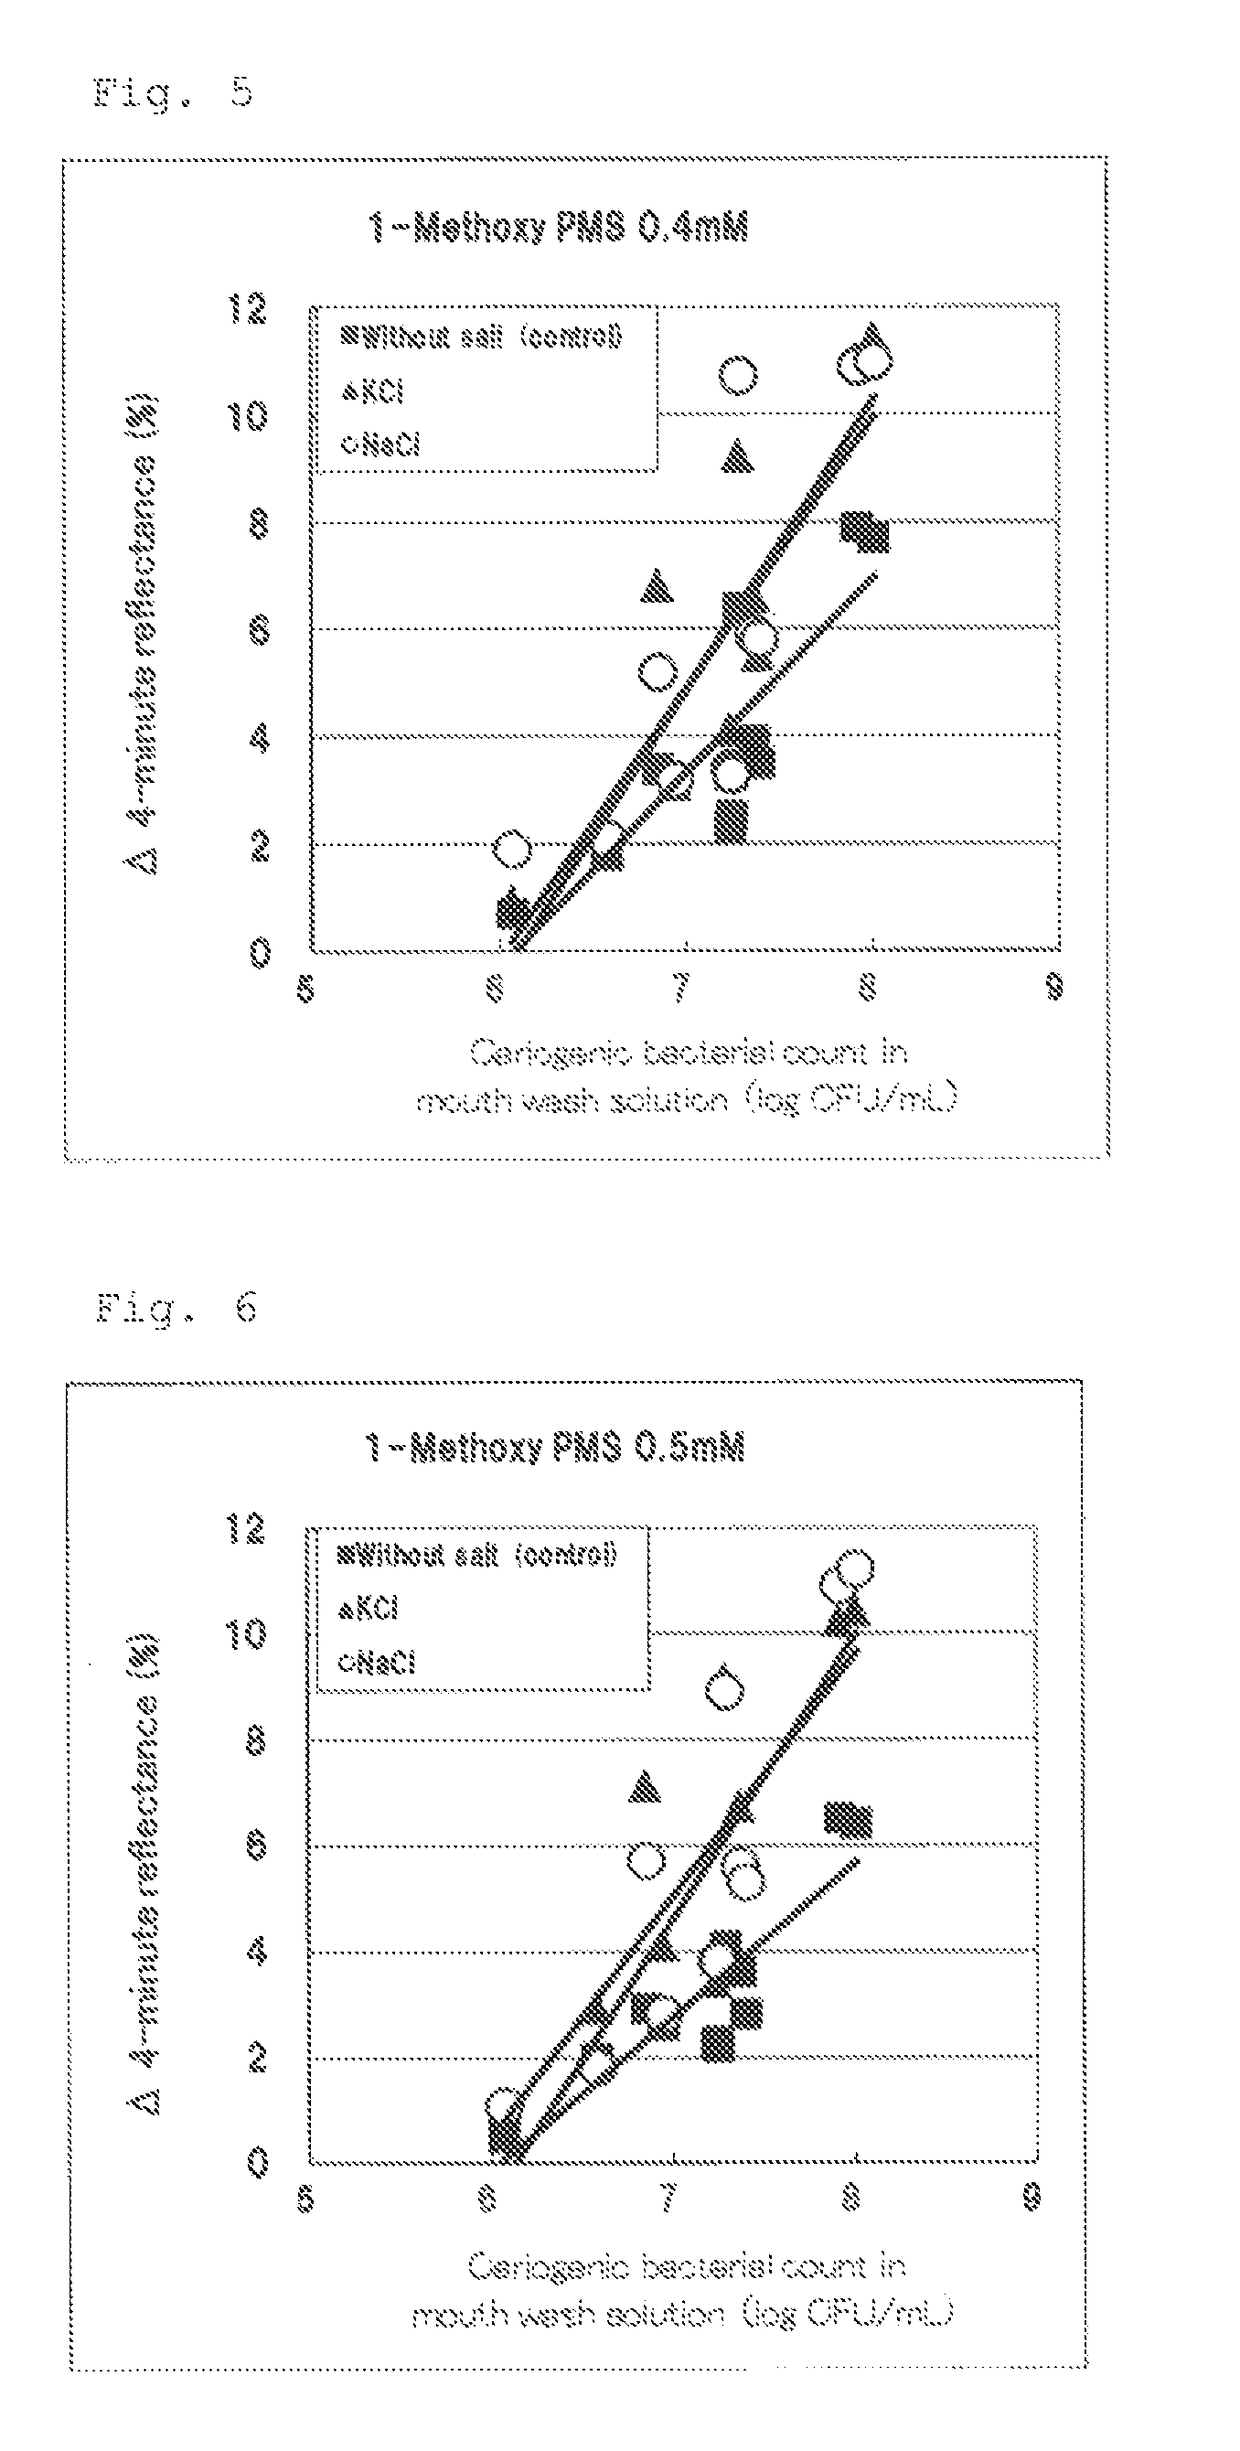 Method for measuring color change of oxidation-reduction indicator